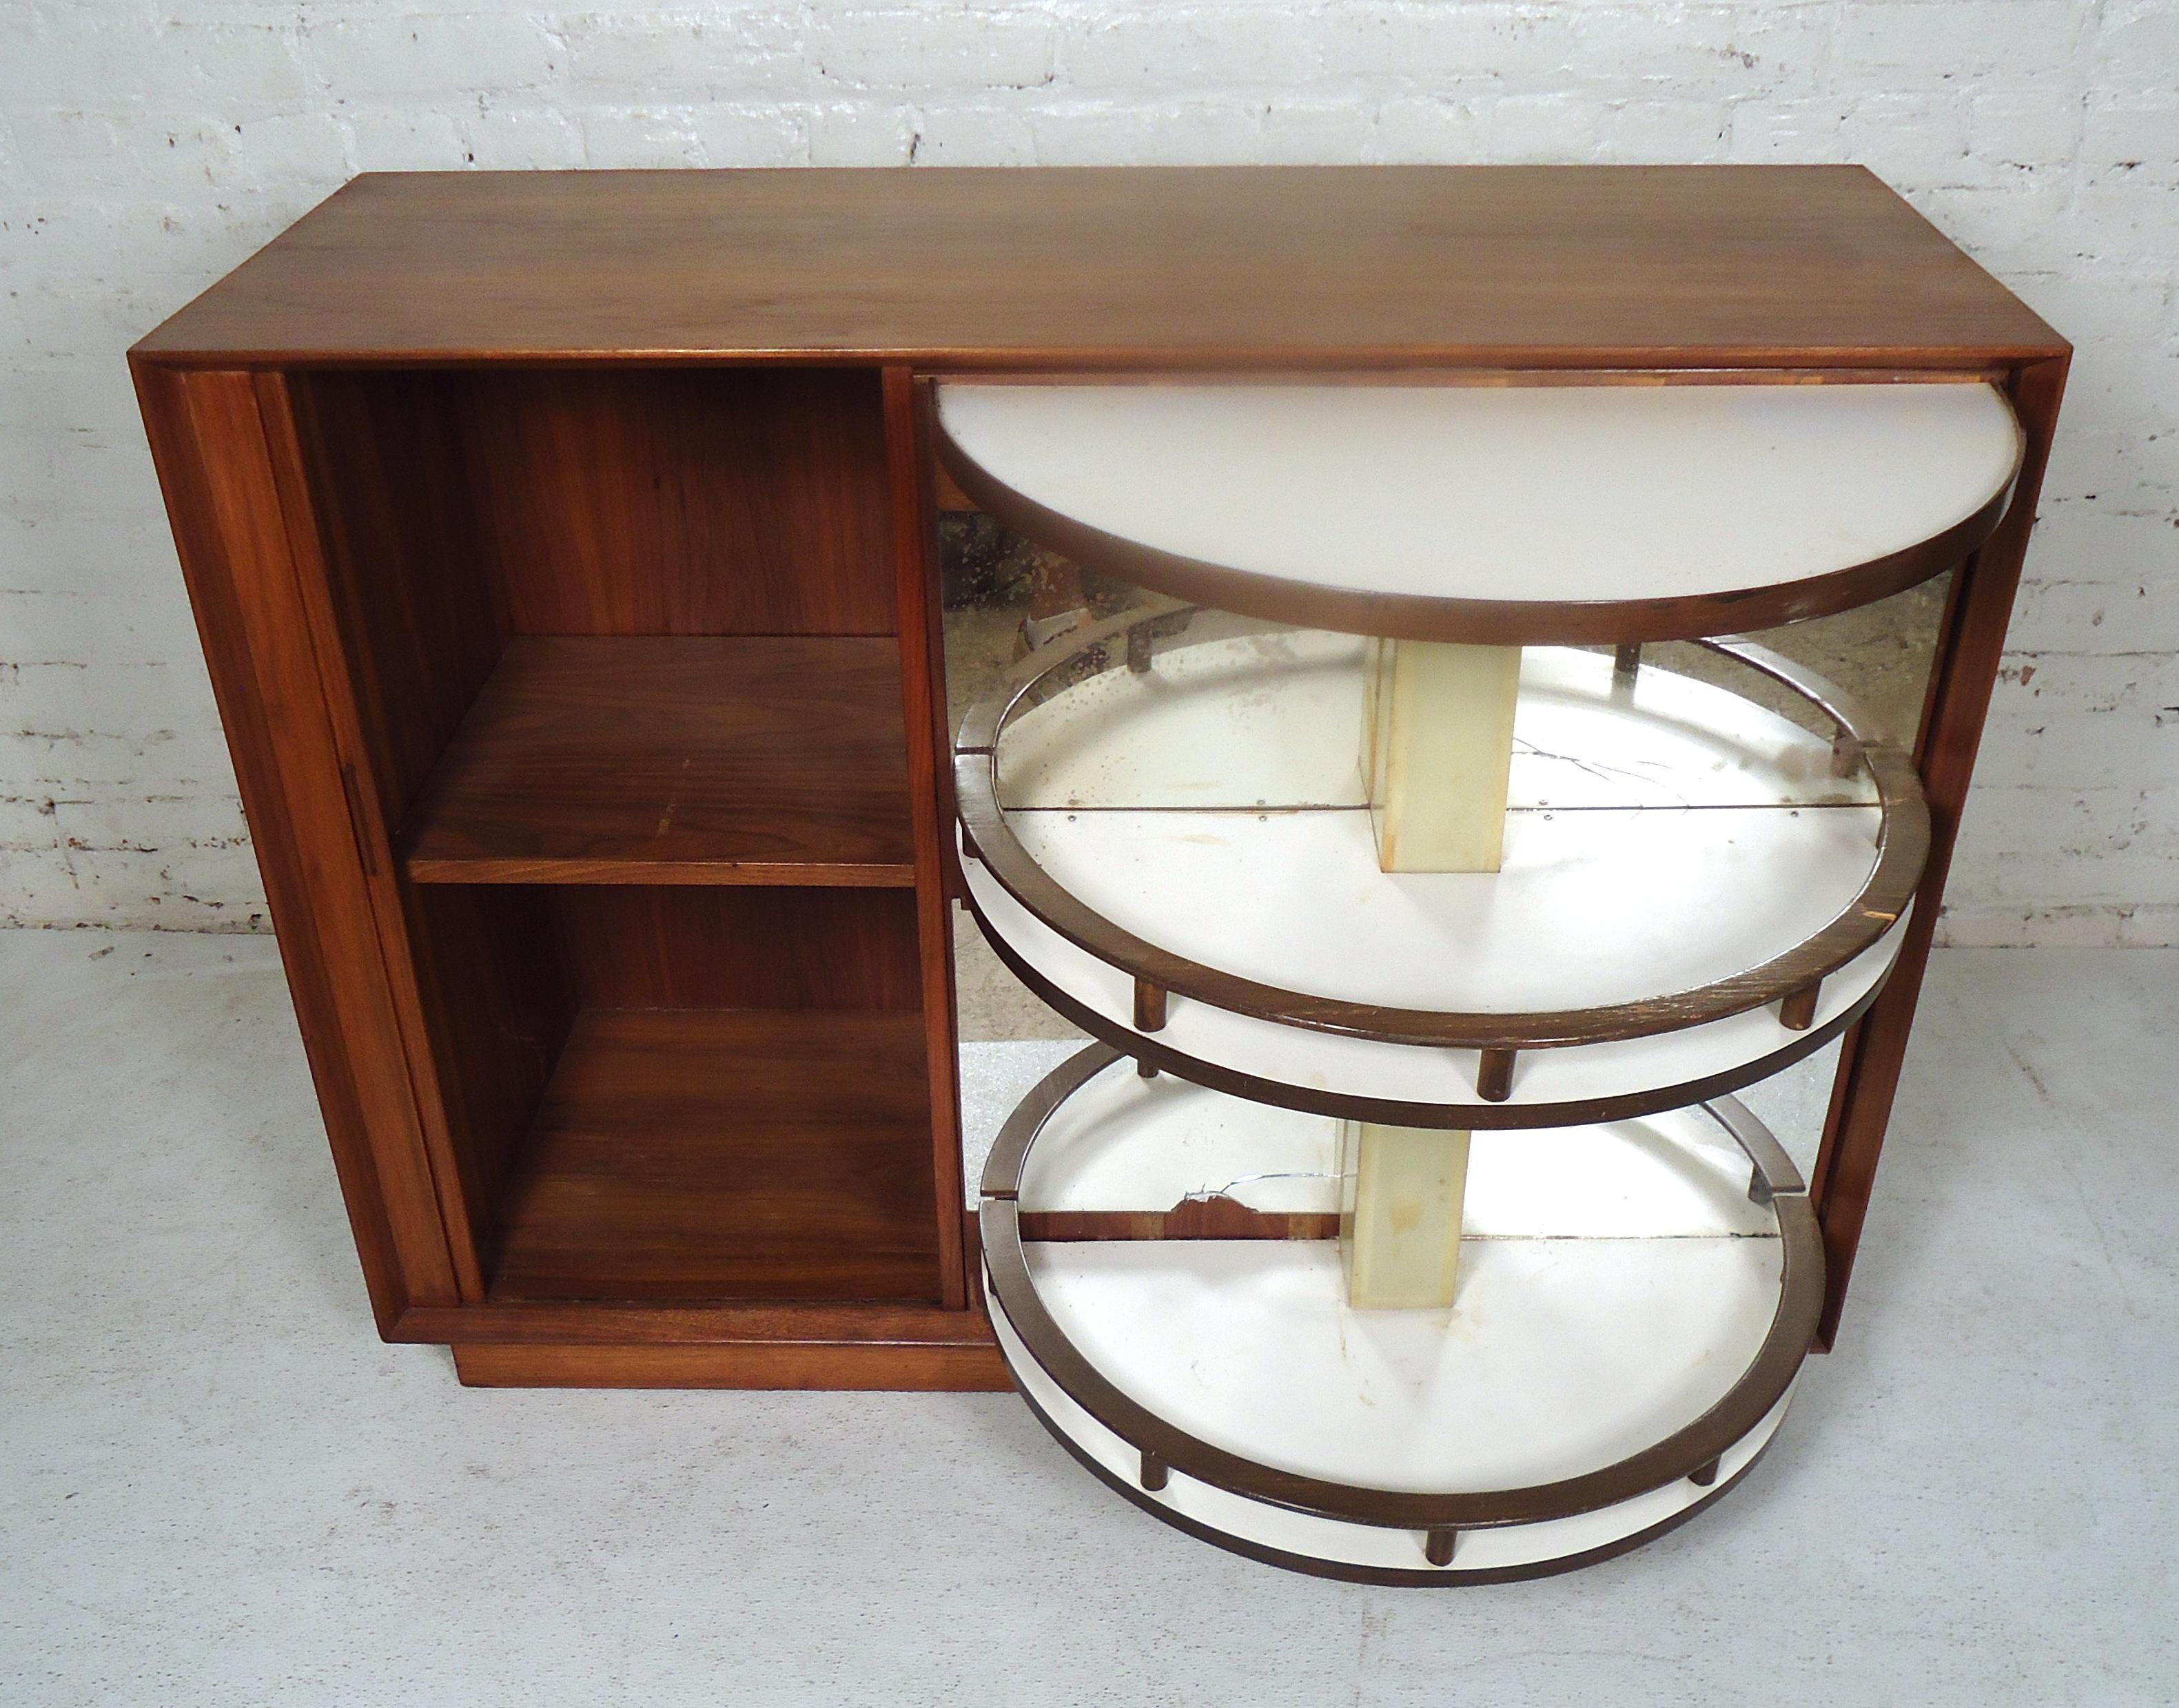 Beautiful vintage modern cabinet featuring a hidden two-tier bar with a mirrored back, and a side tambour door storage cabinet.

(Please confirm item location - NY or NJ - with dealer).